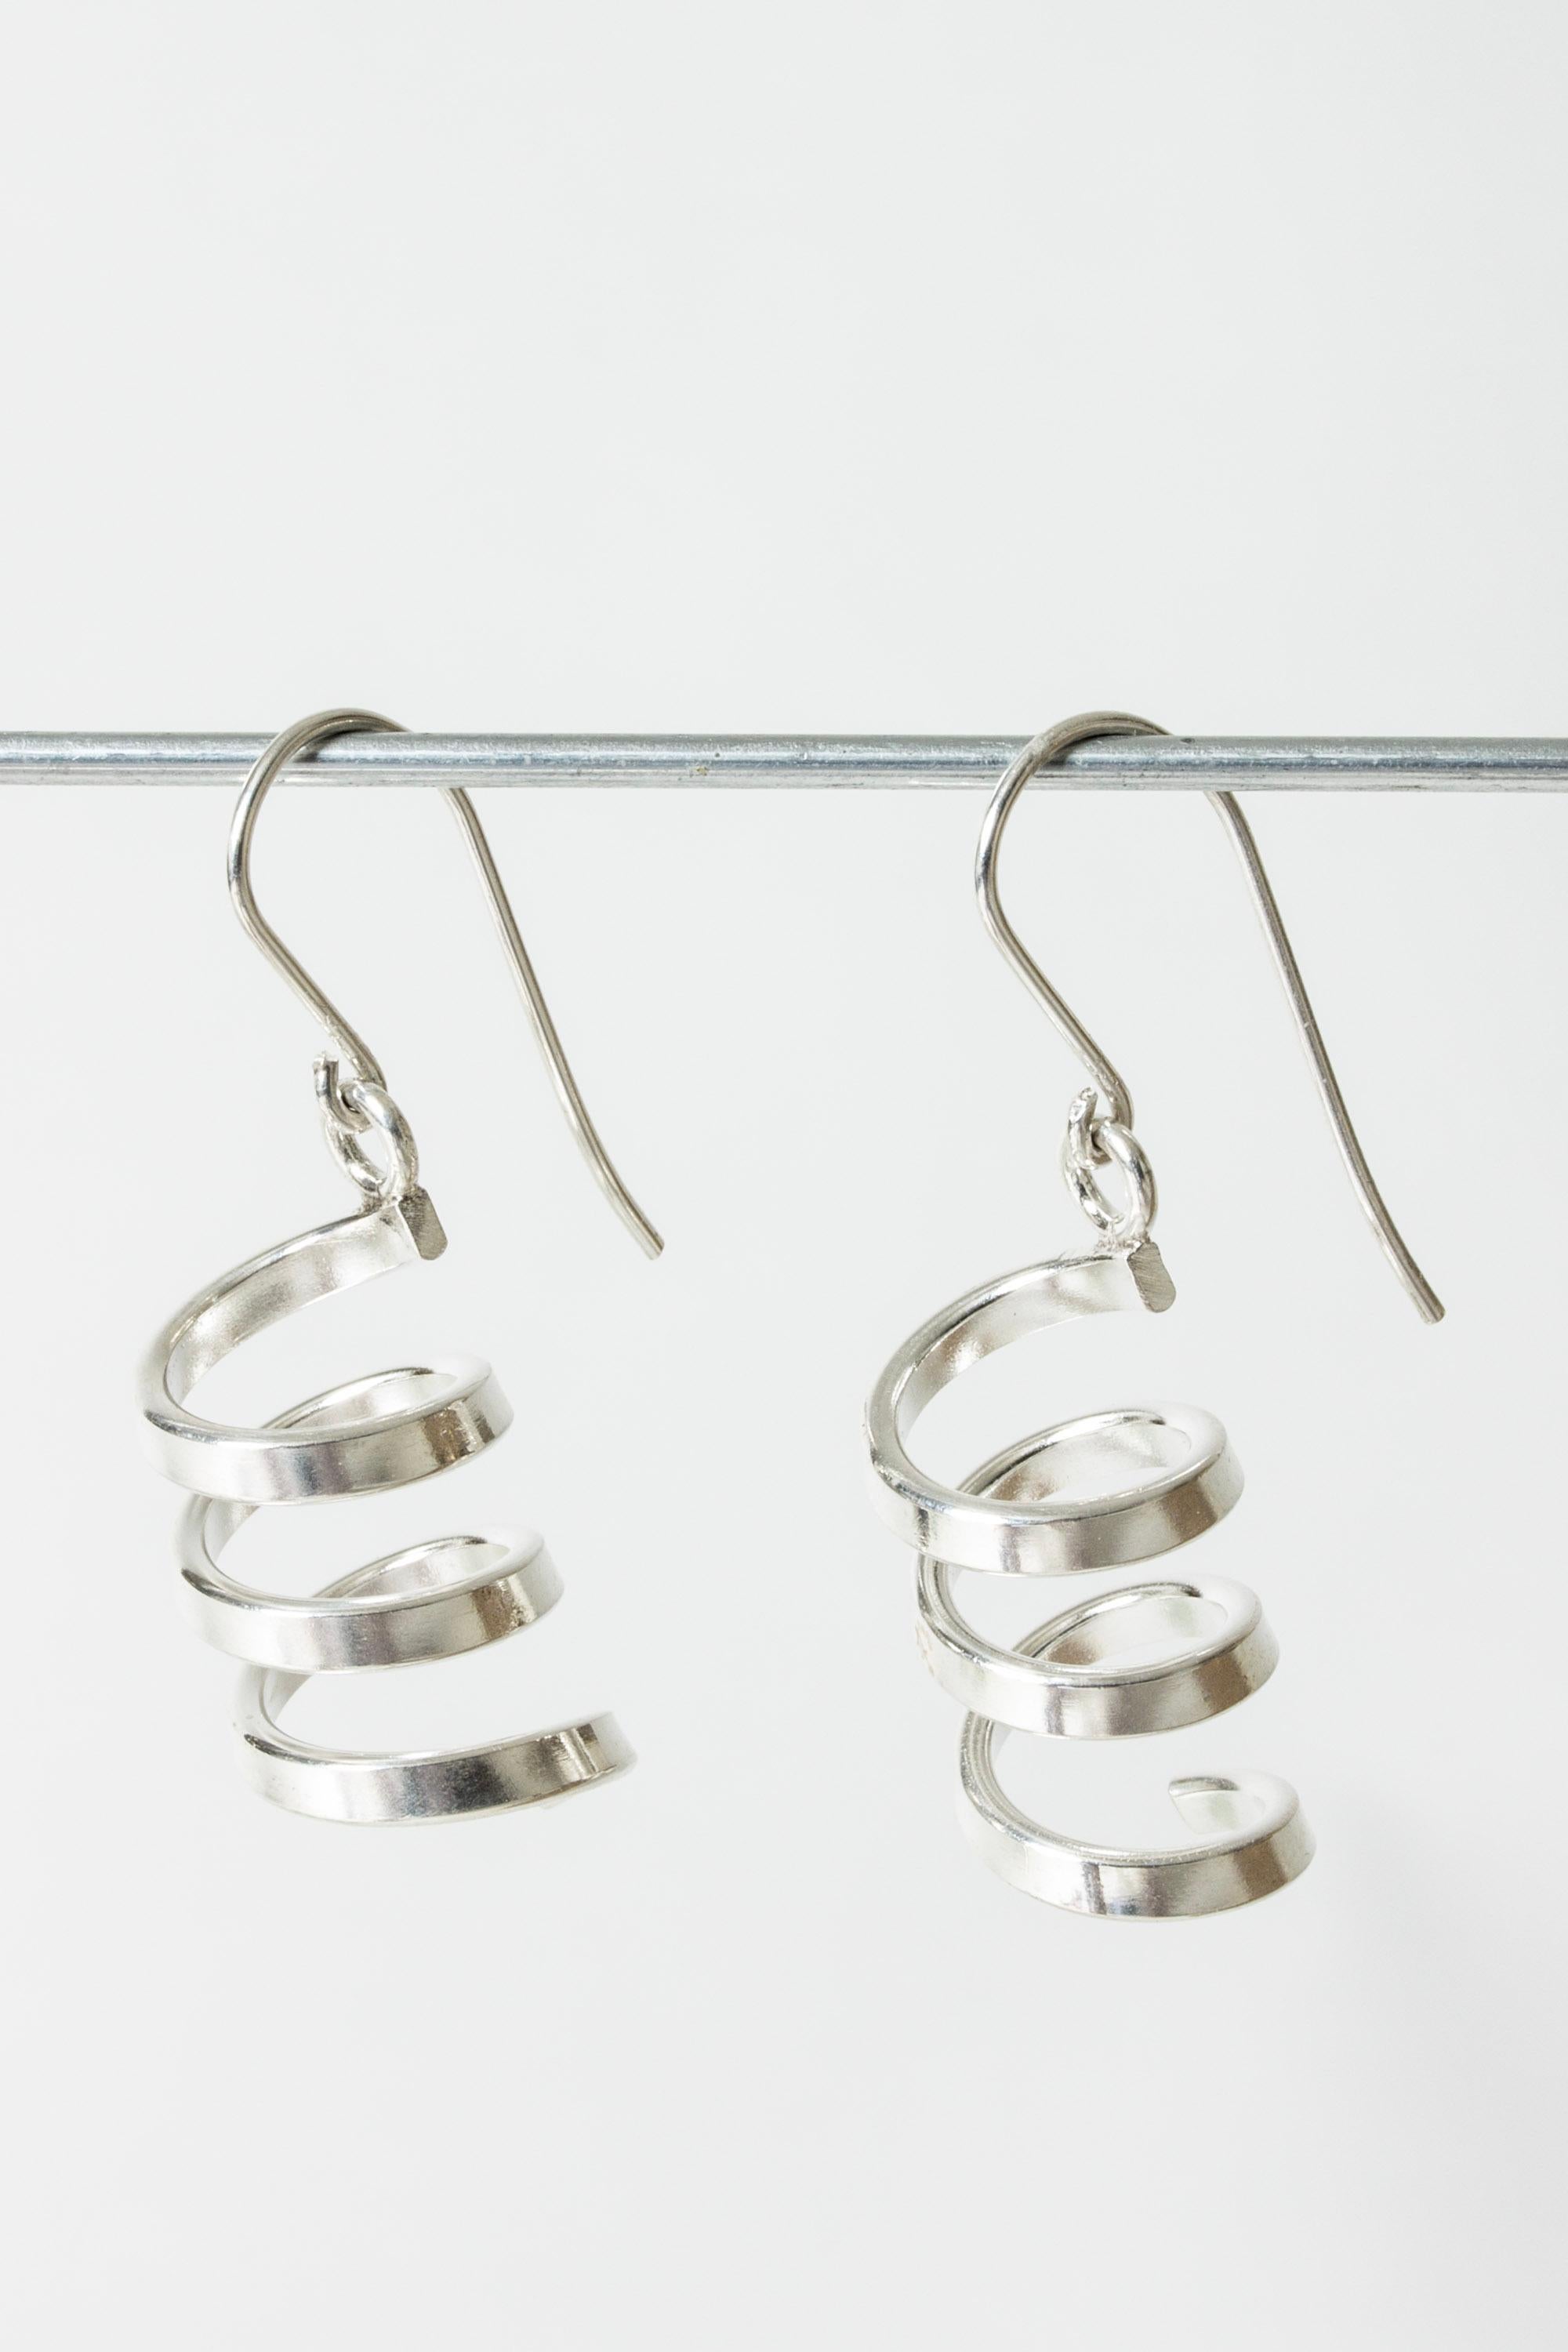 Pair of beautiful silver earrings by Cecilia Johansson, in a vivacious, bouncy spiral design.

